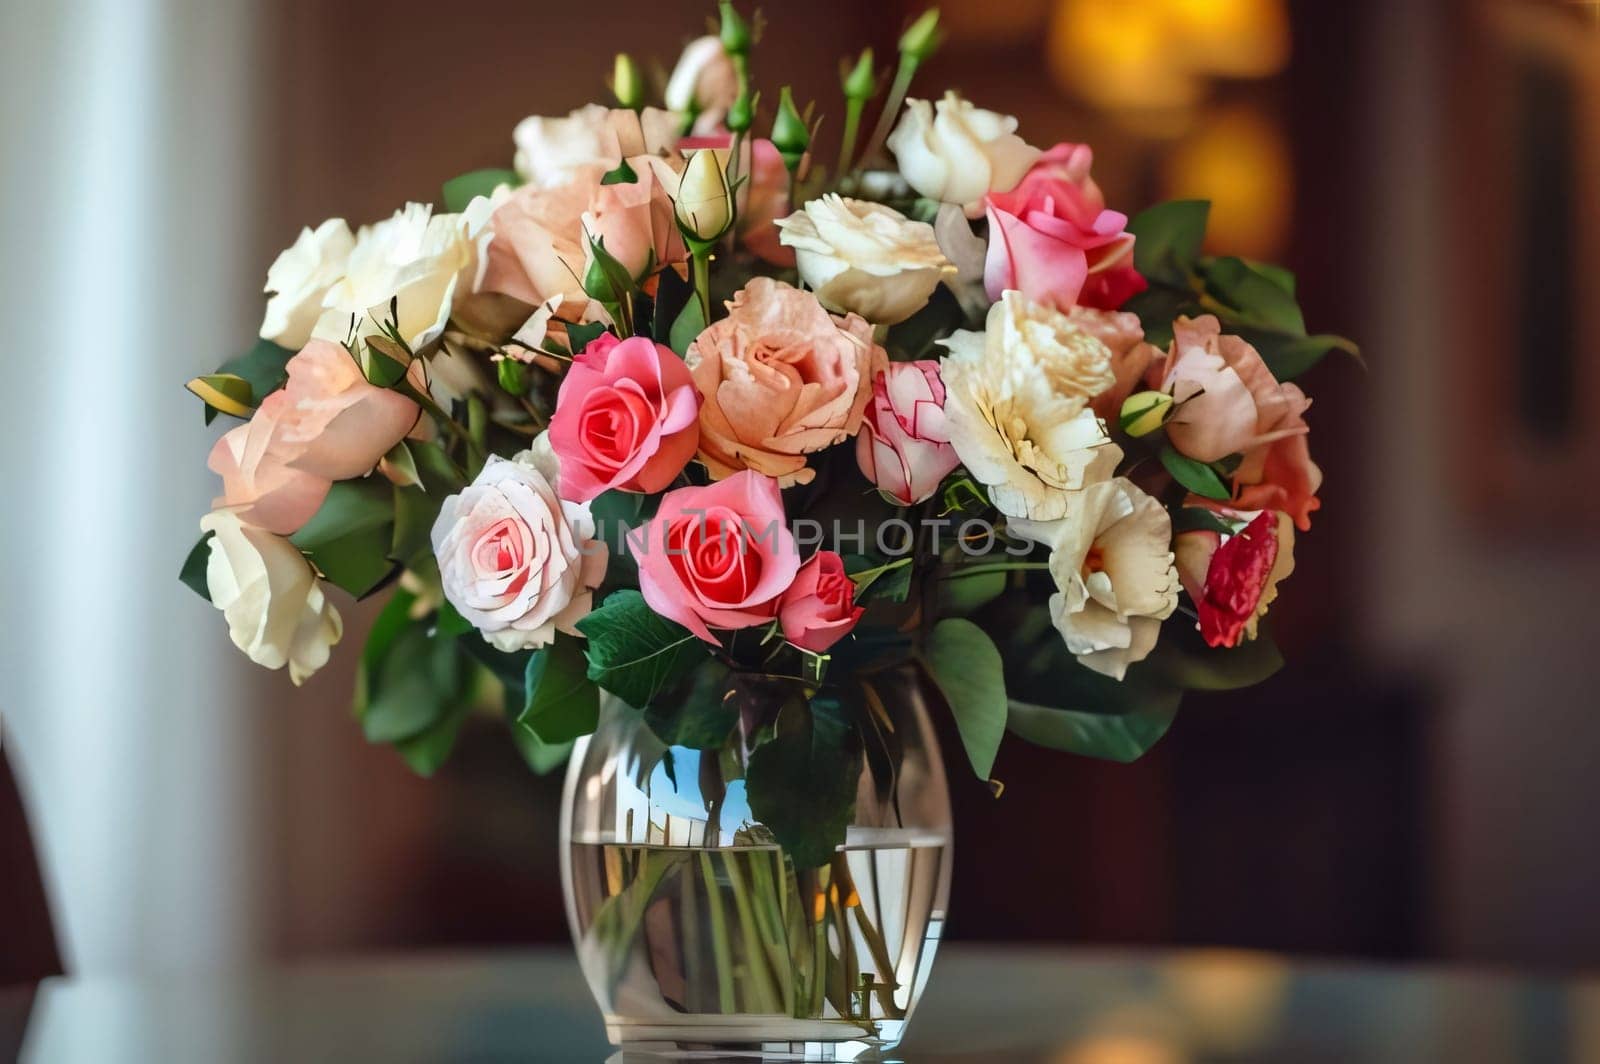 Bouquet of roses, flowers in a glass vase on a dark smudged background. Flowering flowers, a symbol of spring, new life. A joyful time of nature waking up to life.